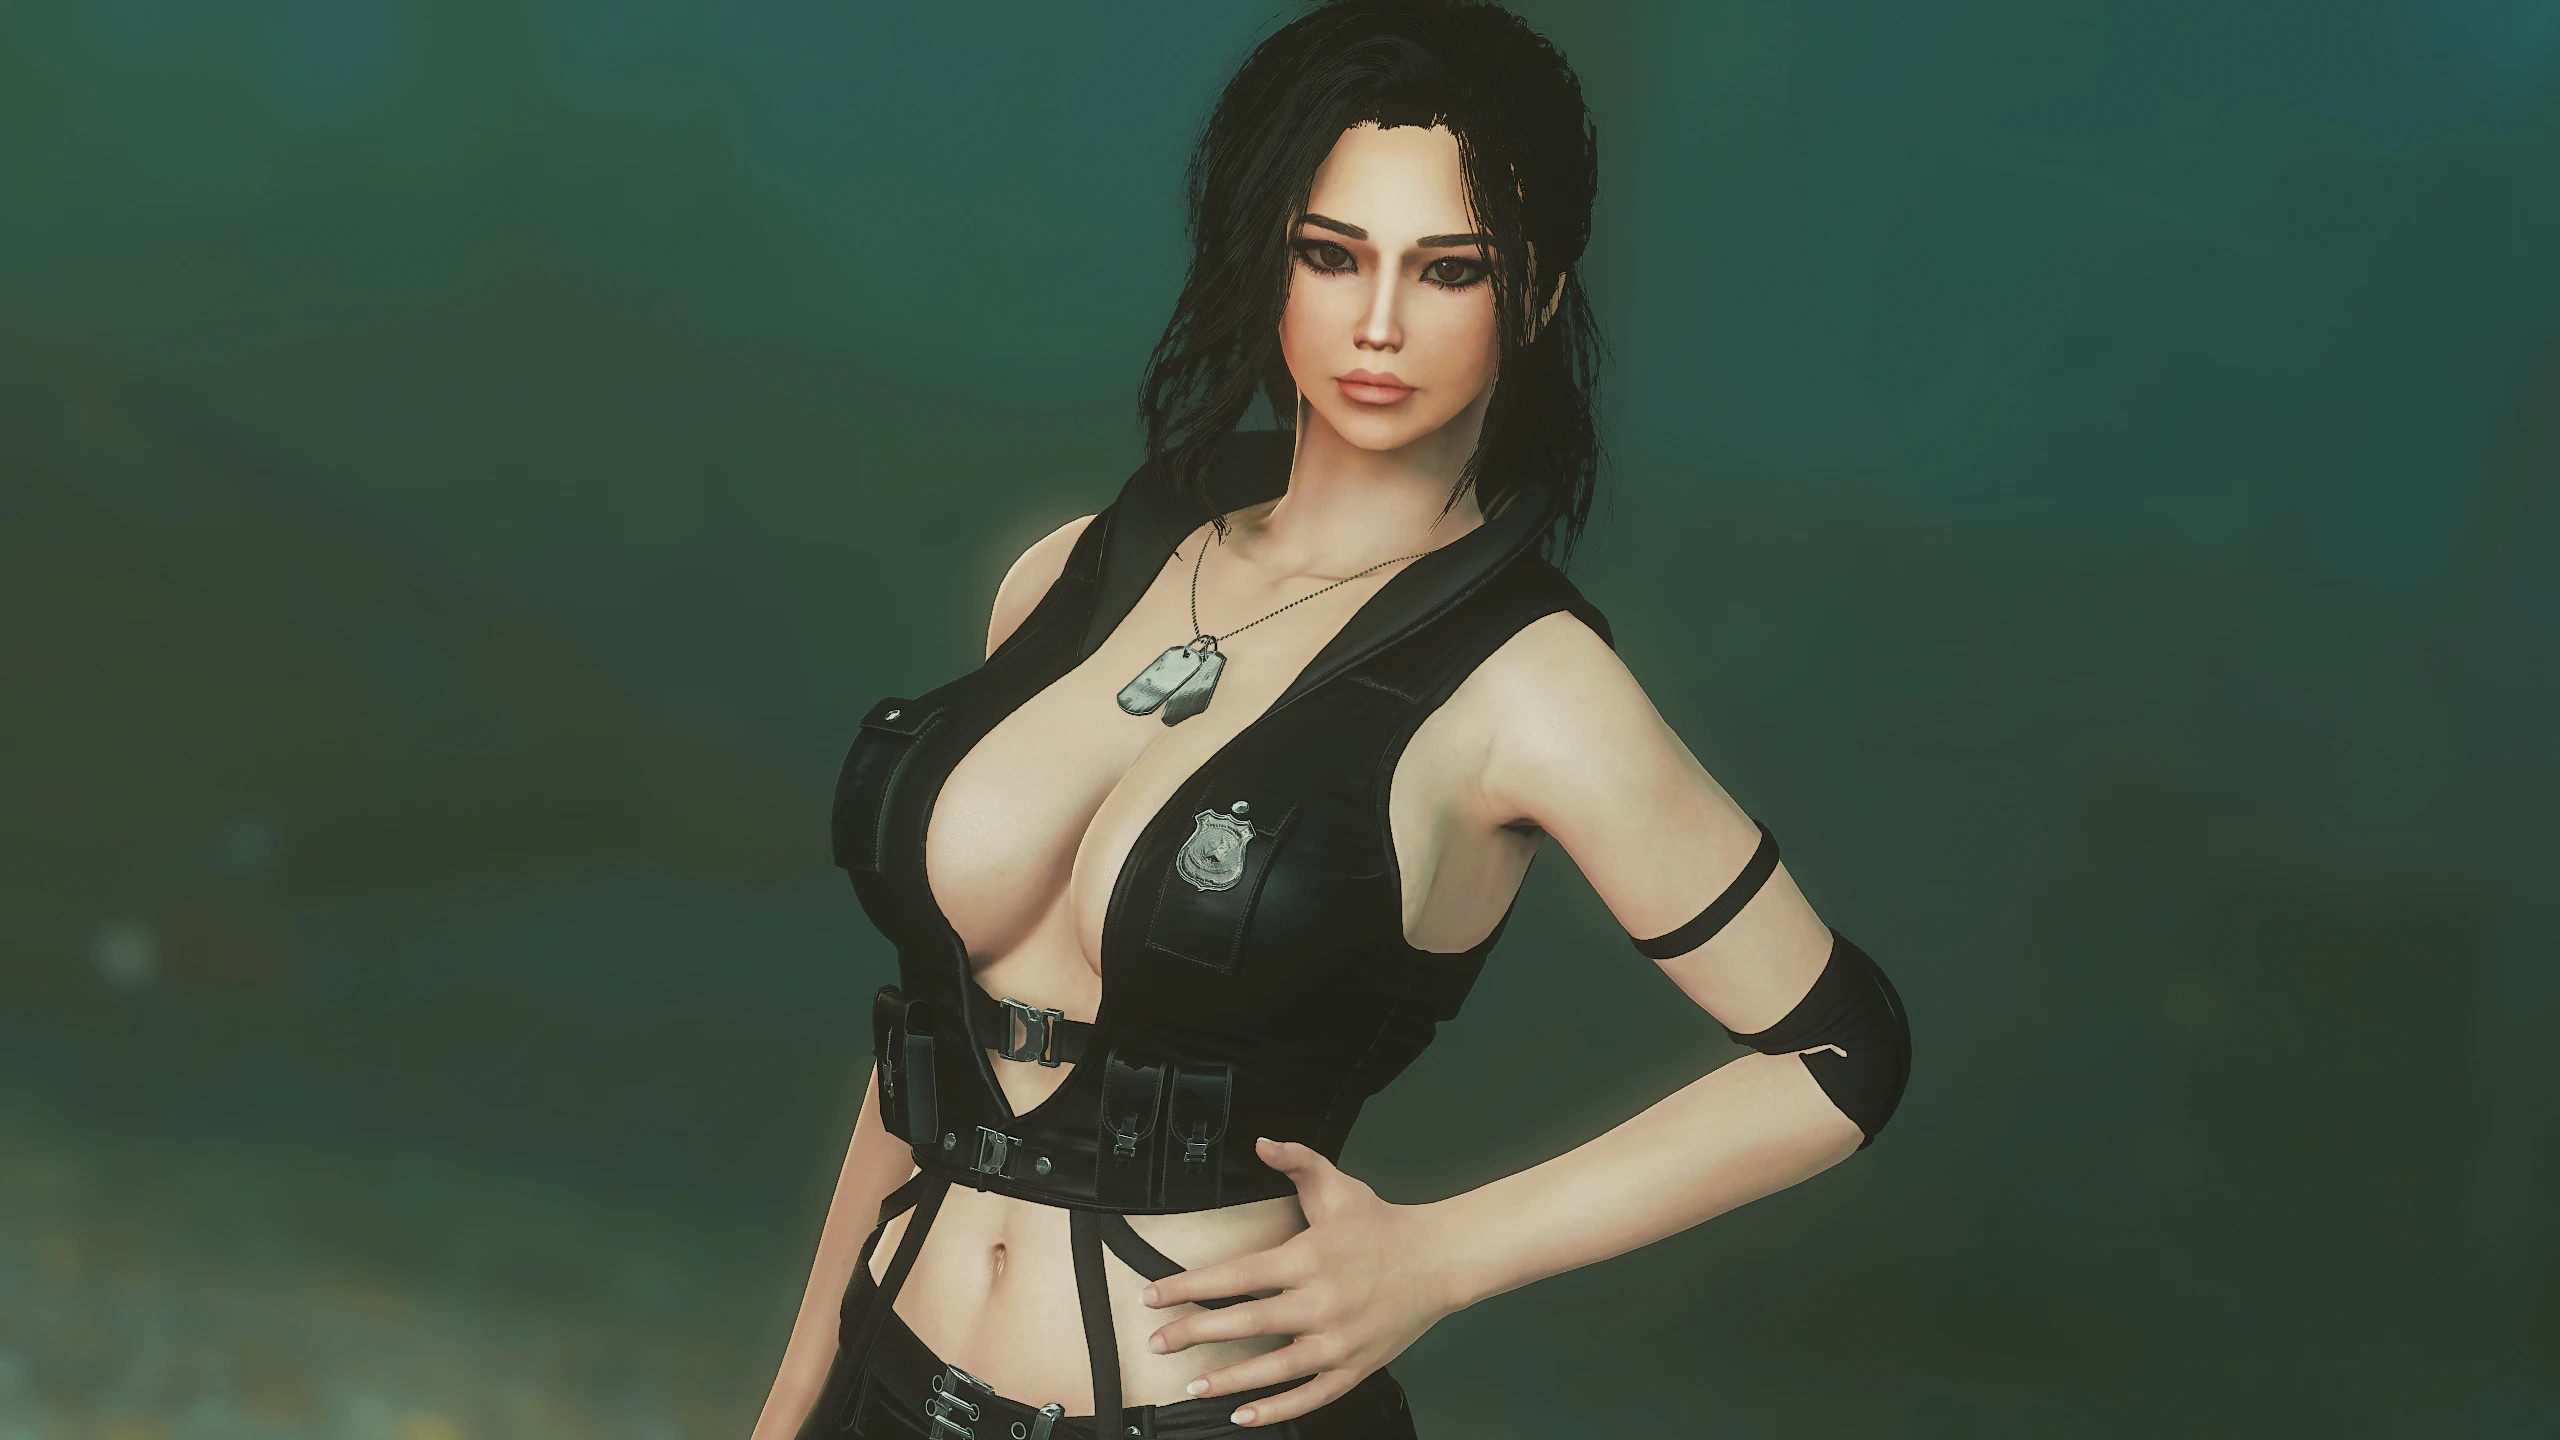 Vtaw workshop fallout 4 clothing armor mods фото 10